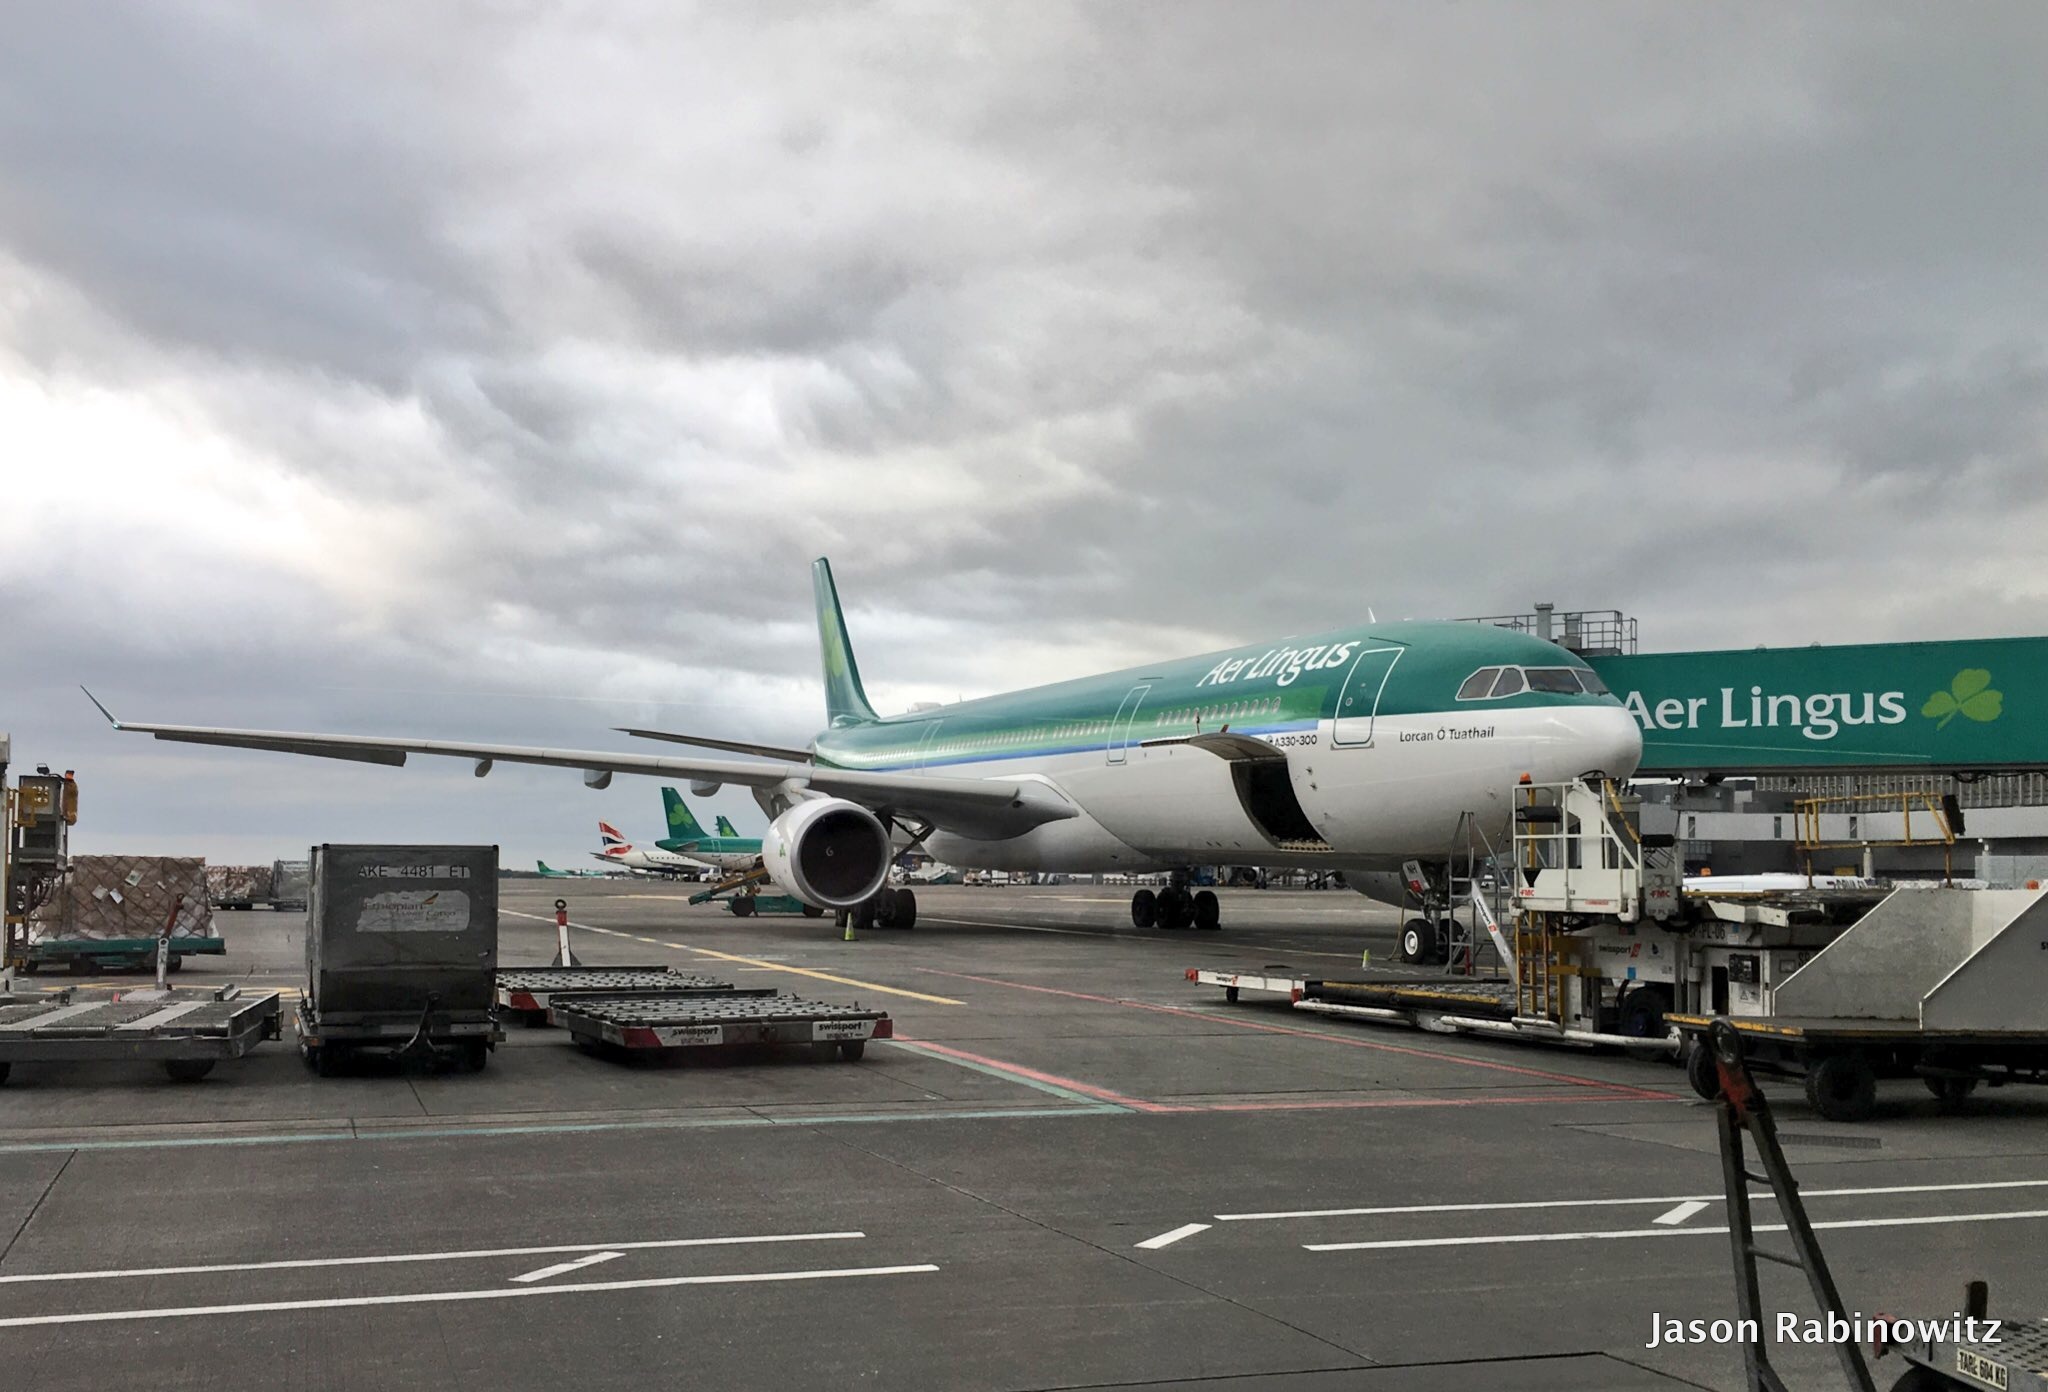 We are moving to New York JFK Terminal 7 - Aer Lingus